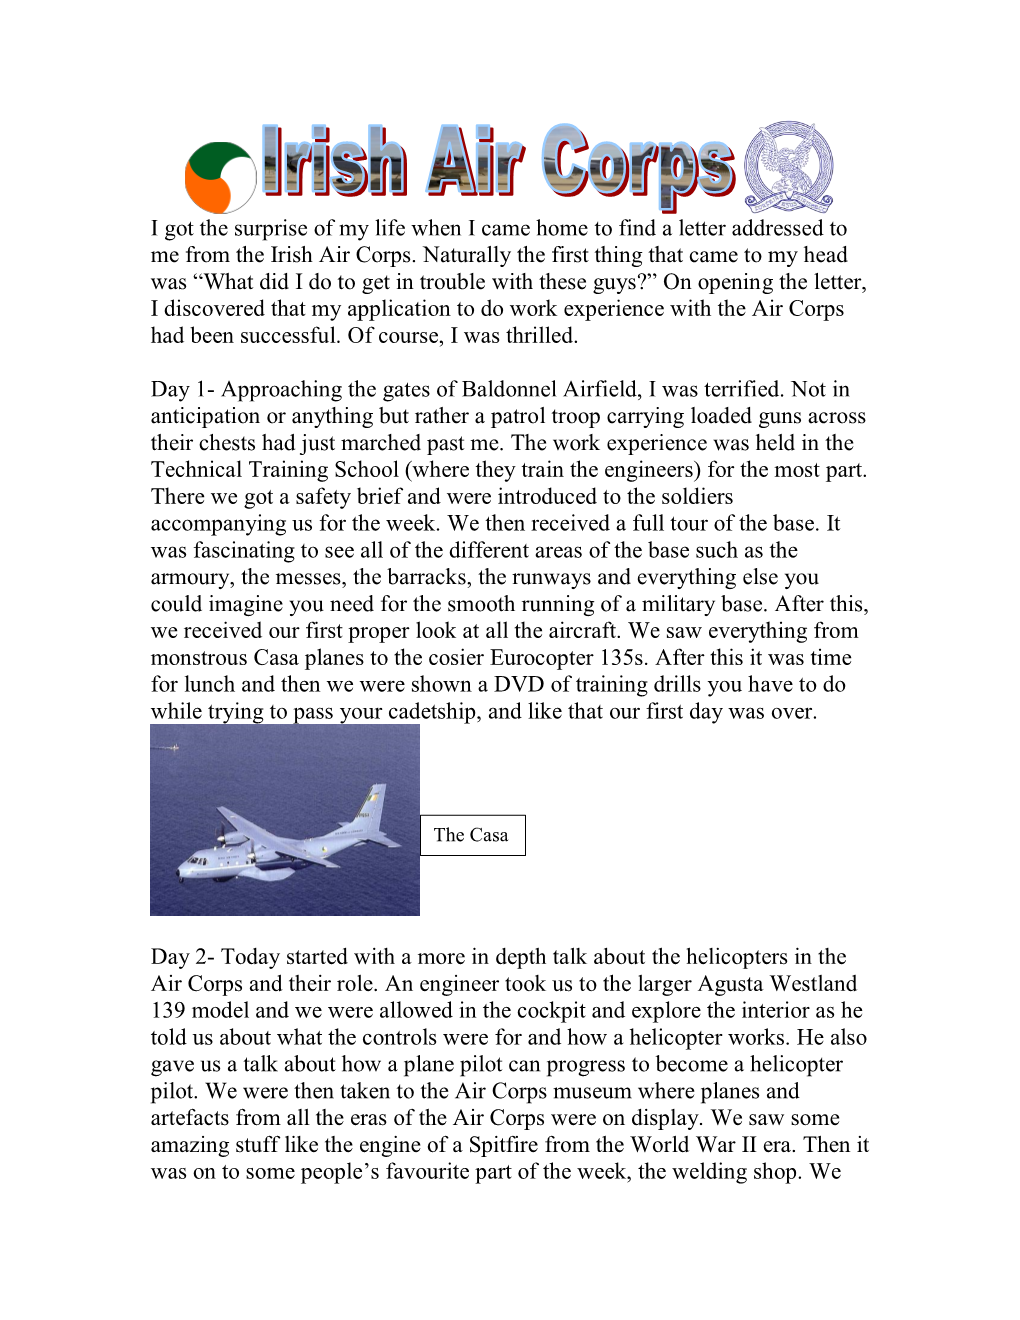 Luke Gilligan's Article About His Work Experience with the Air Corps